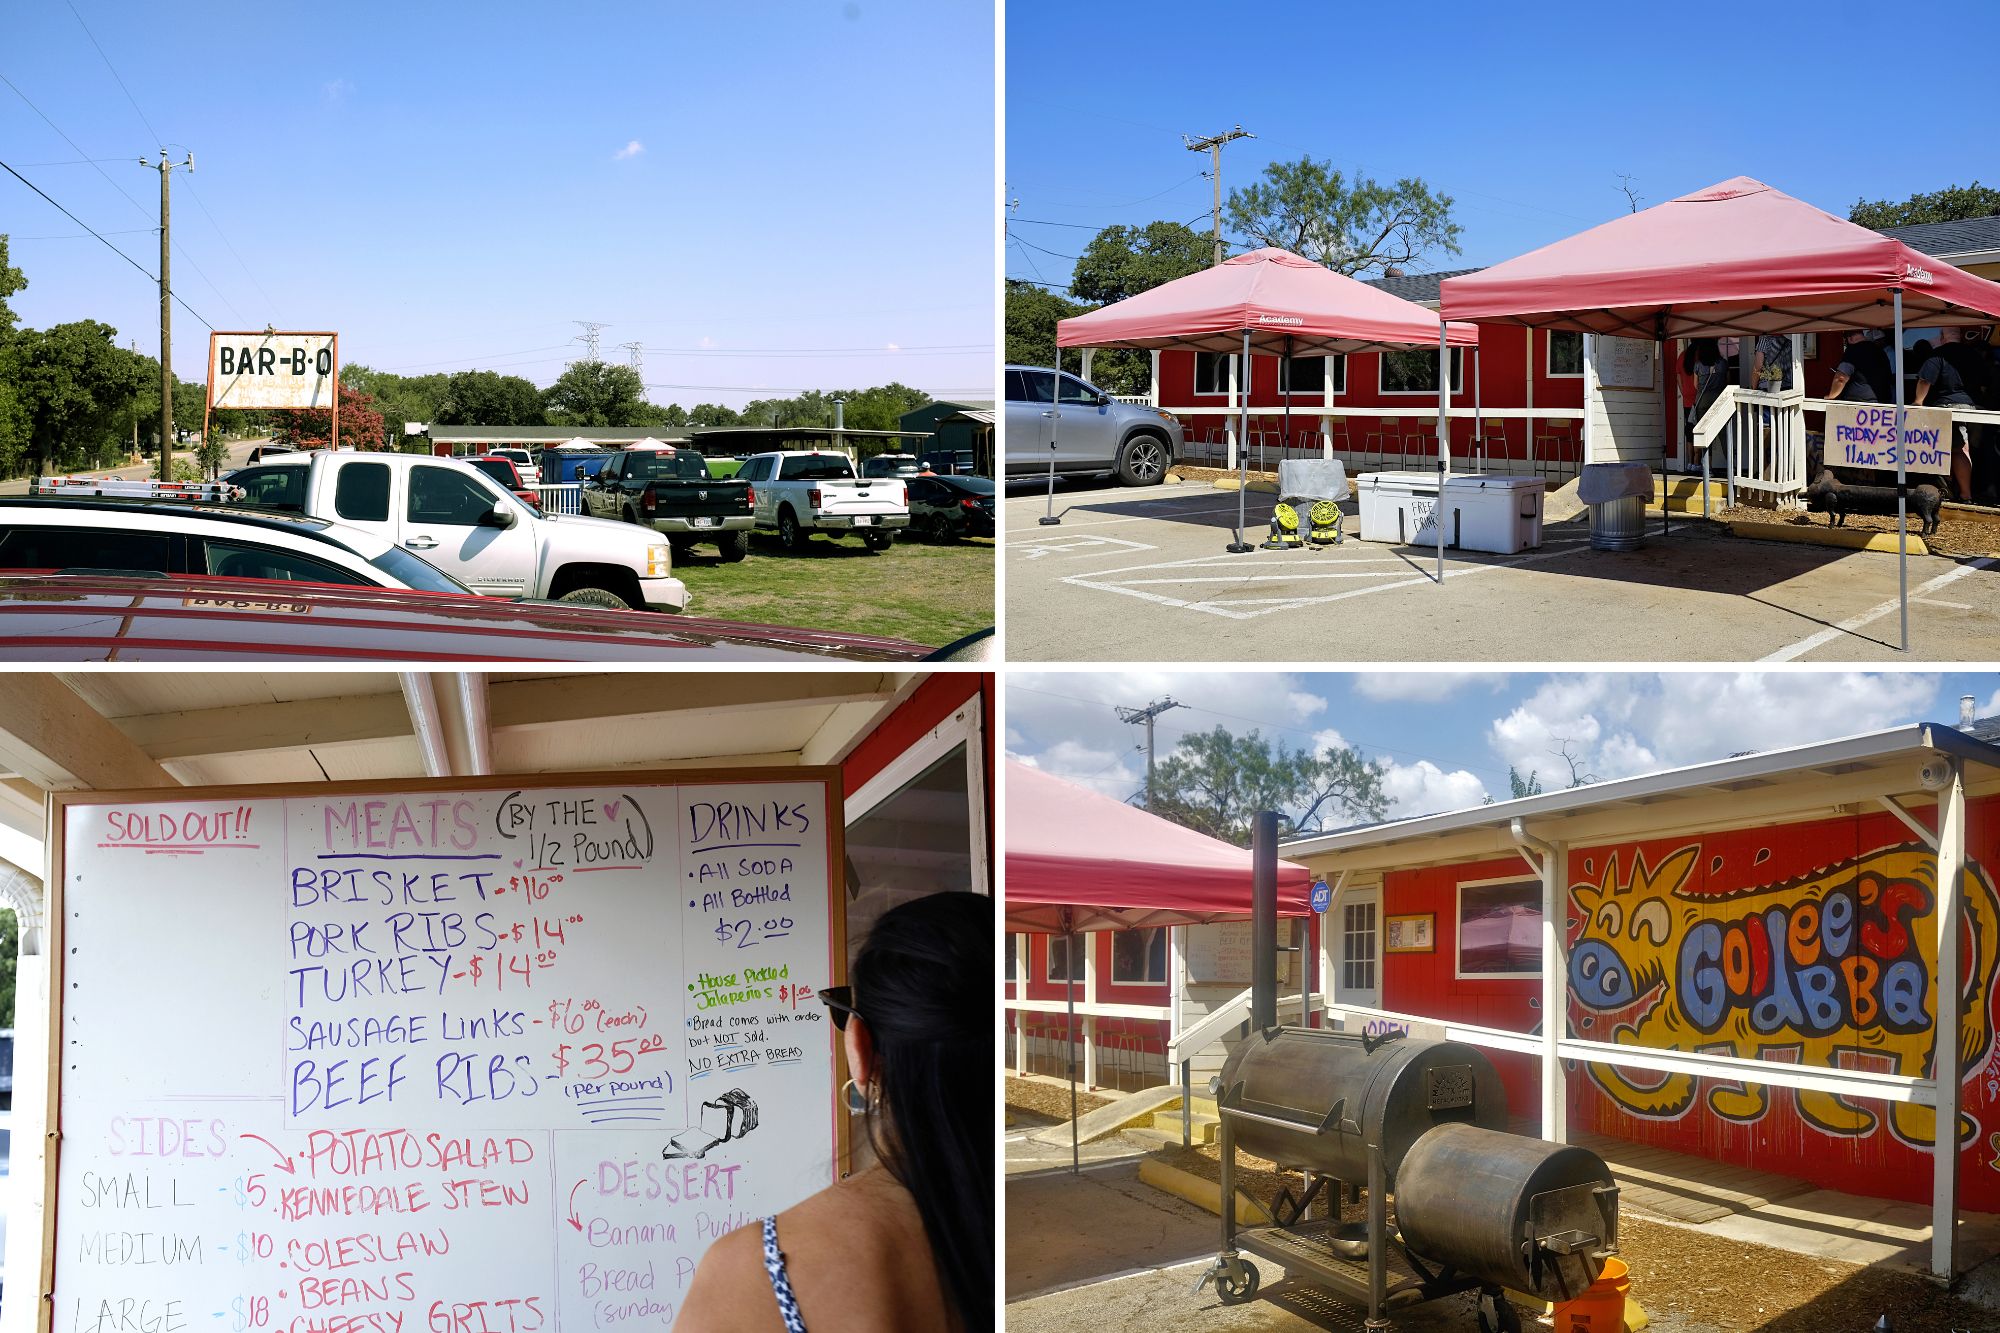 Goldee's BBQ parking lot and exterior